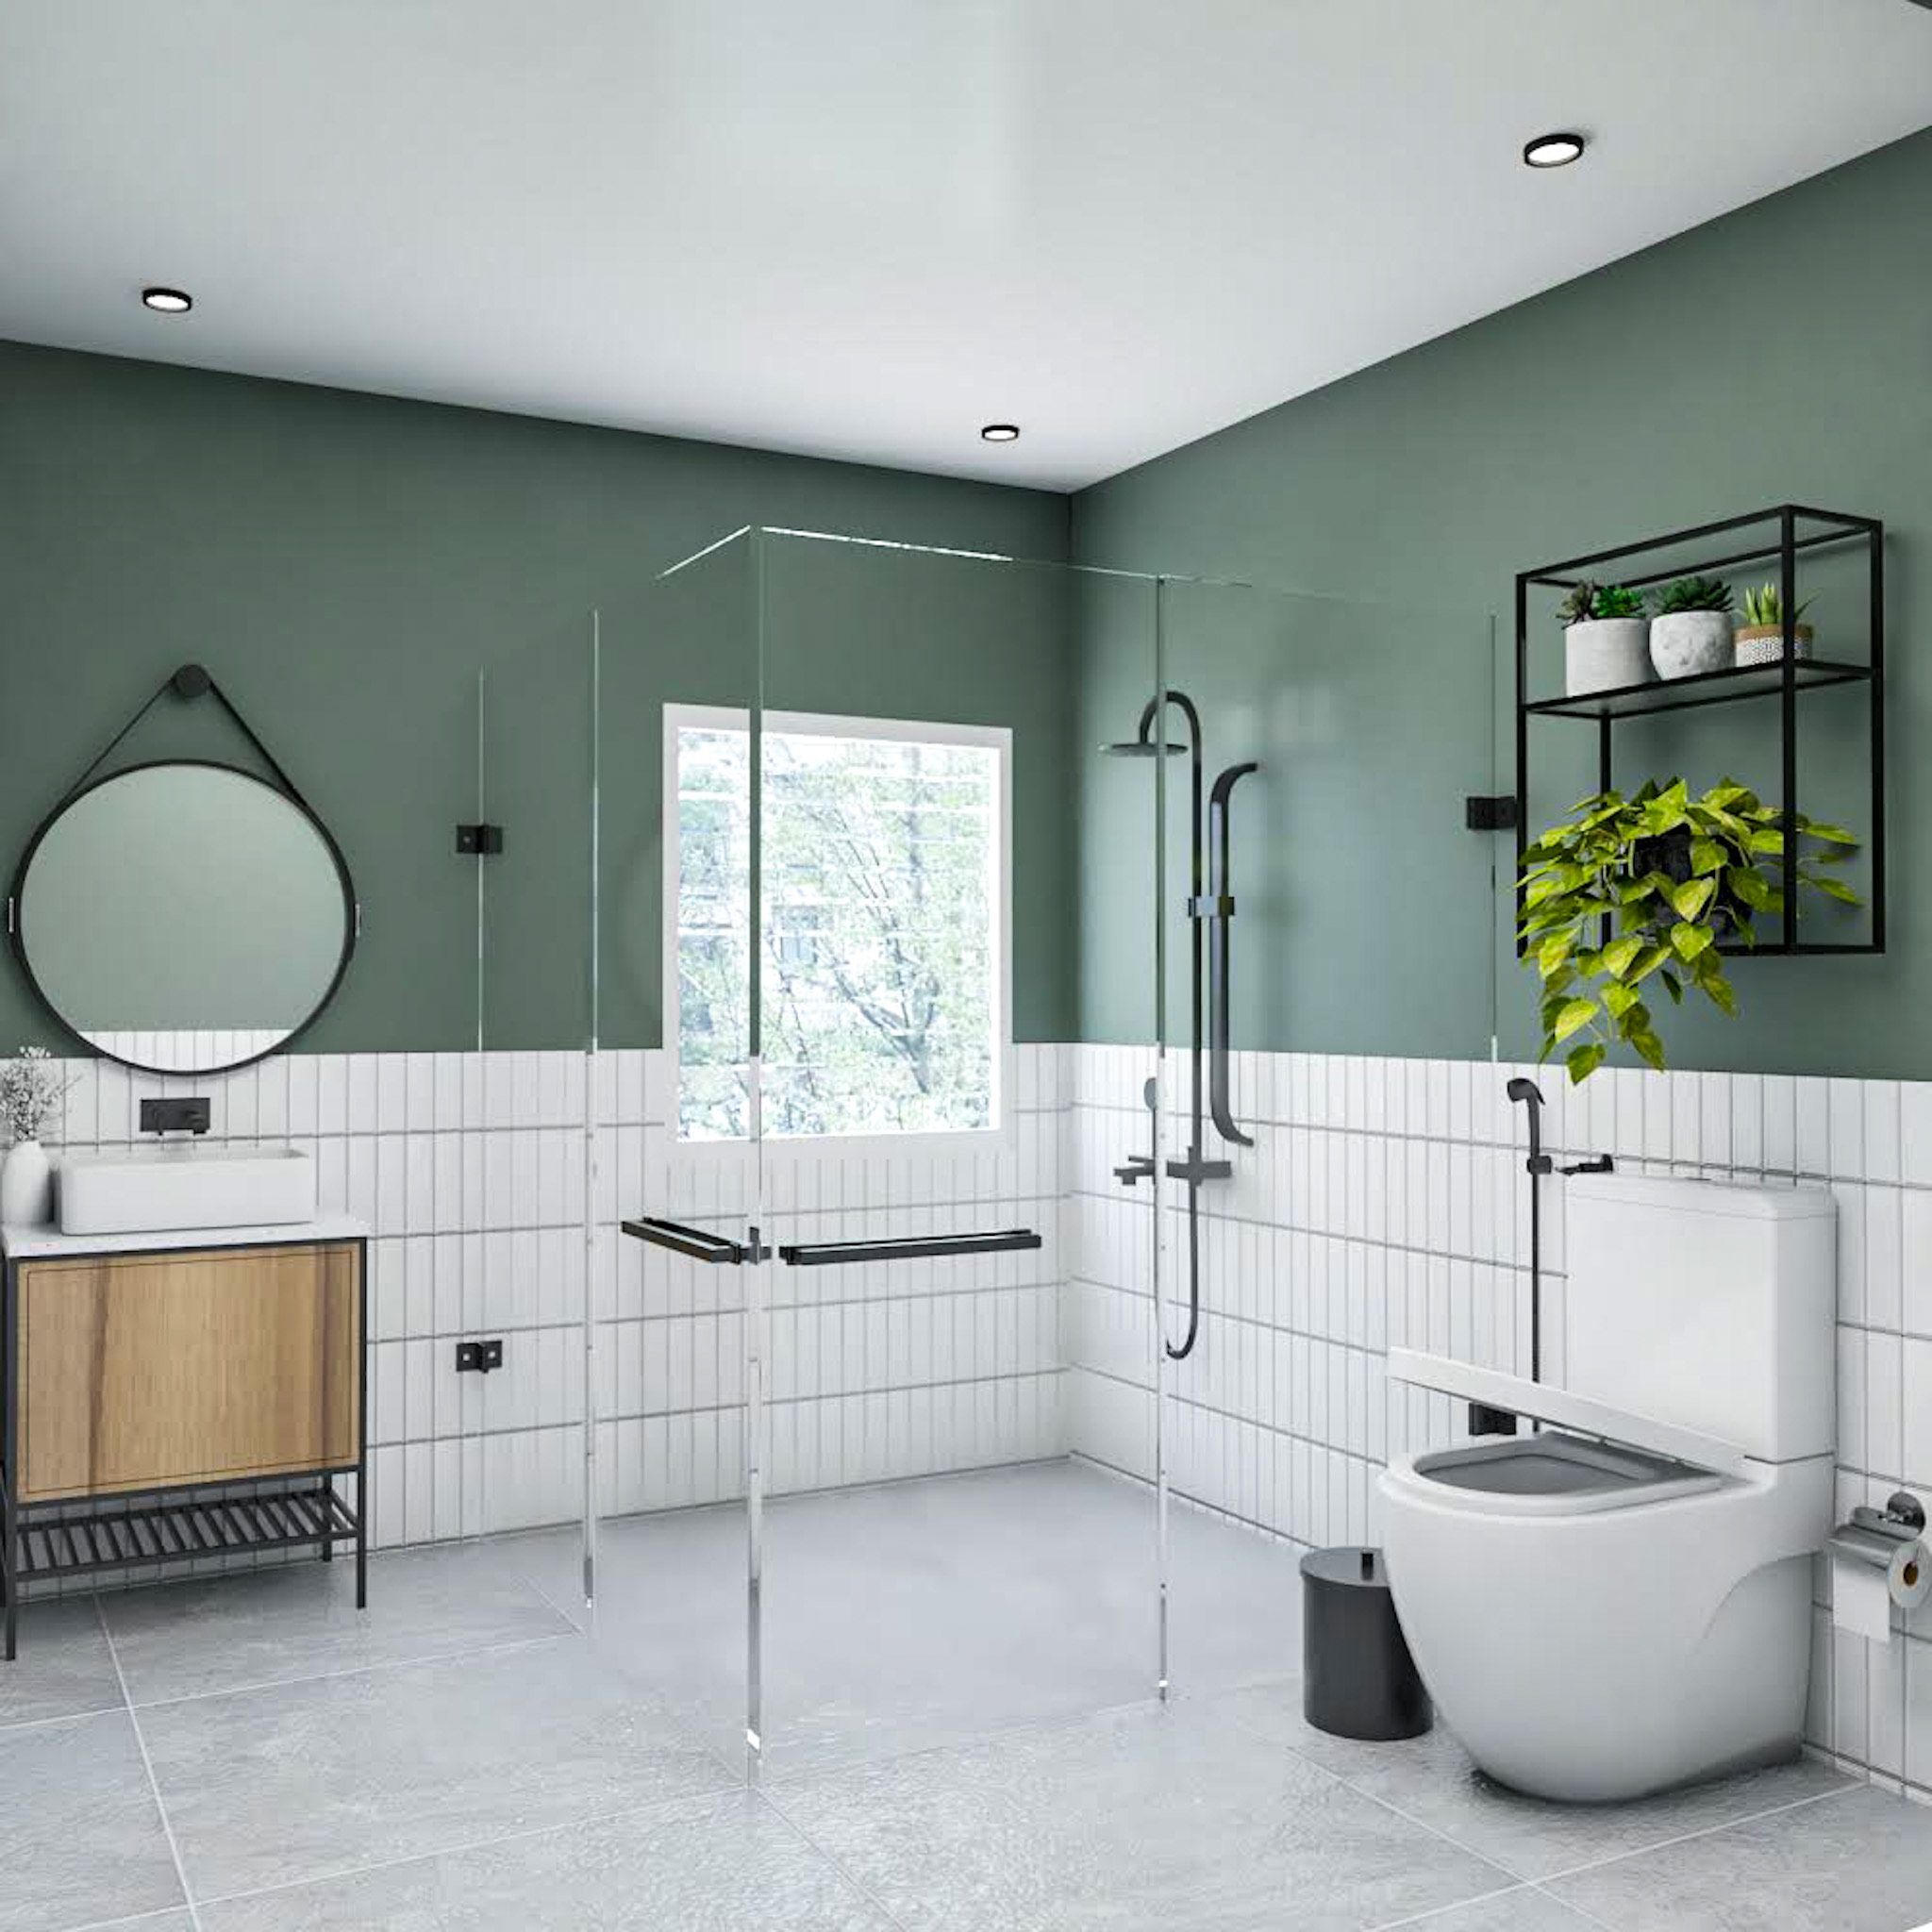 Modern Olive Green Wall Paint Design For Bathrooms